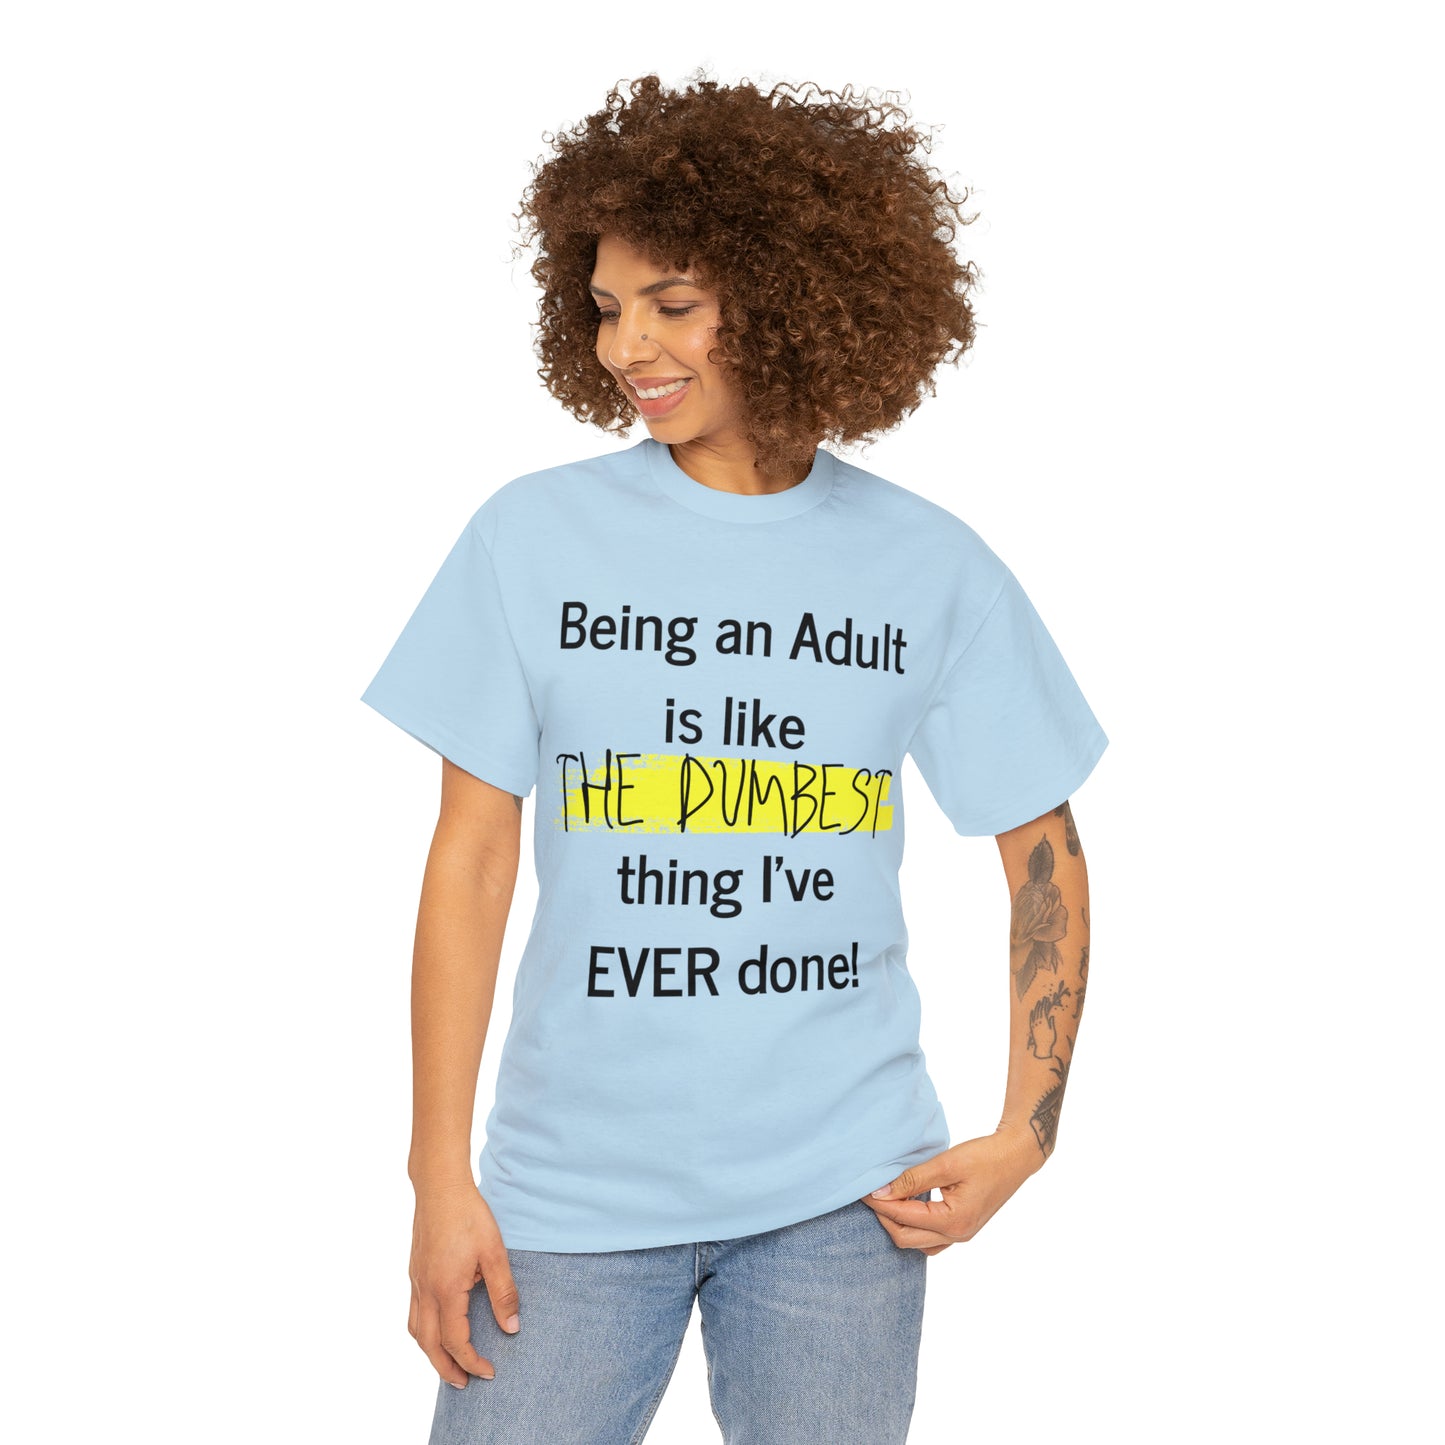 Being an Adult is like The Dumbest Thing I've EVER Done! - Unisex Heavy Cotton Tee - POD